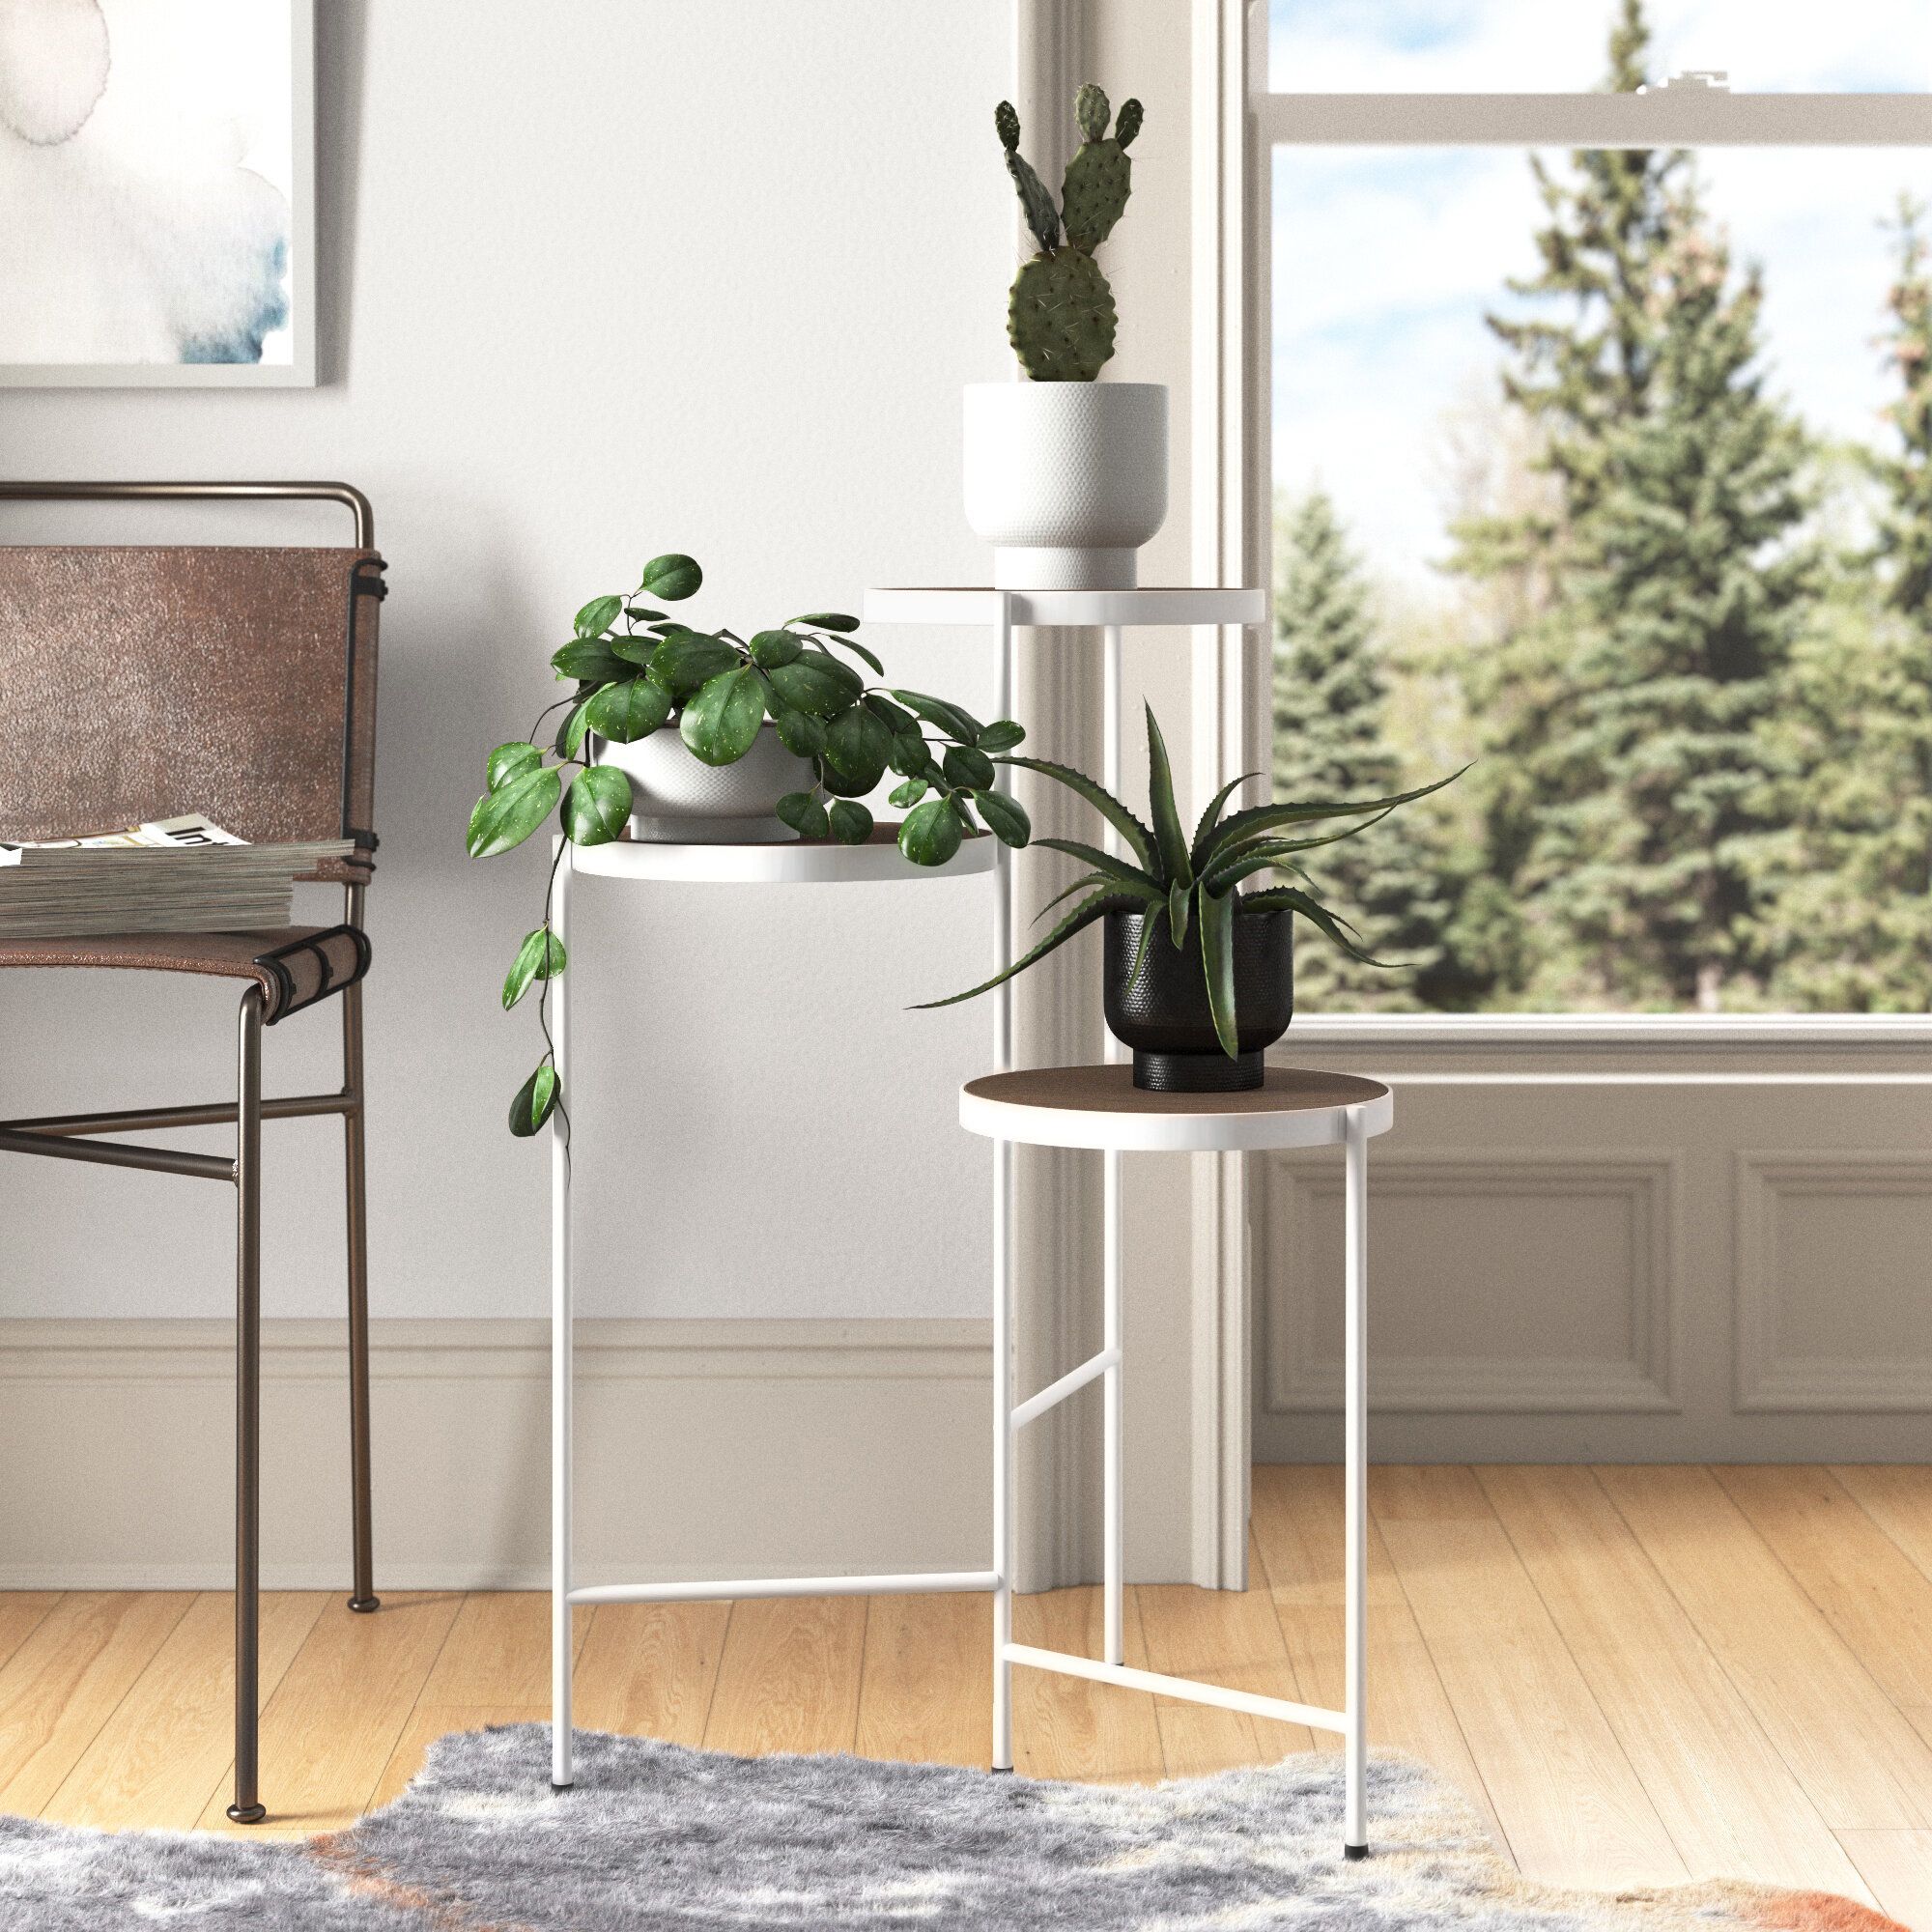 Wayfair | White Plant Stands & Tables You'll Love In 2023 Intended For White Plant Stands (View 11 of 15)